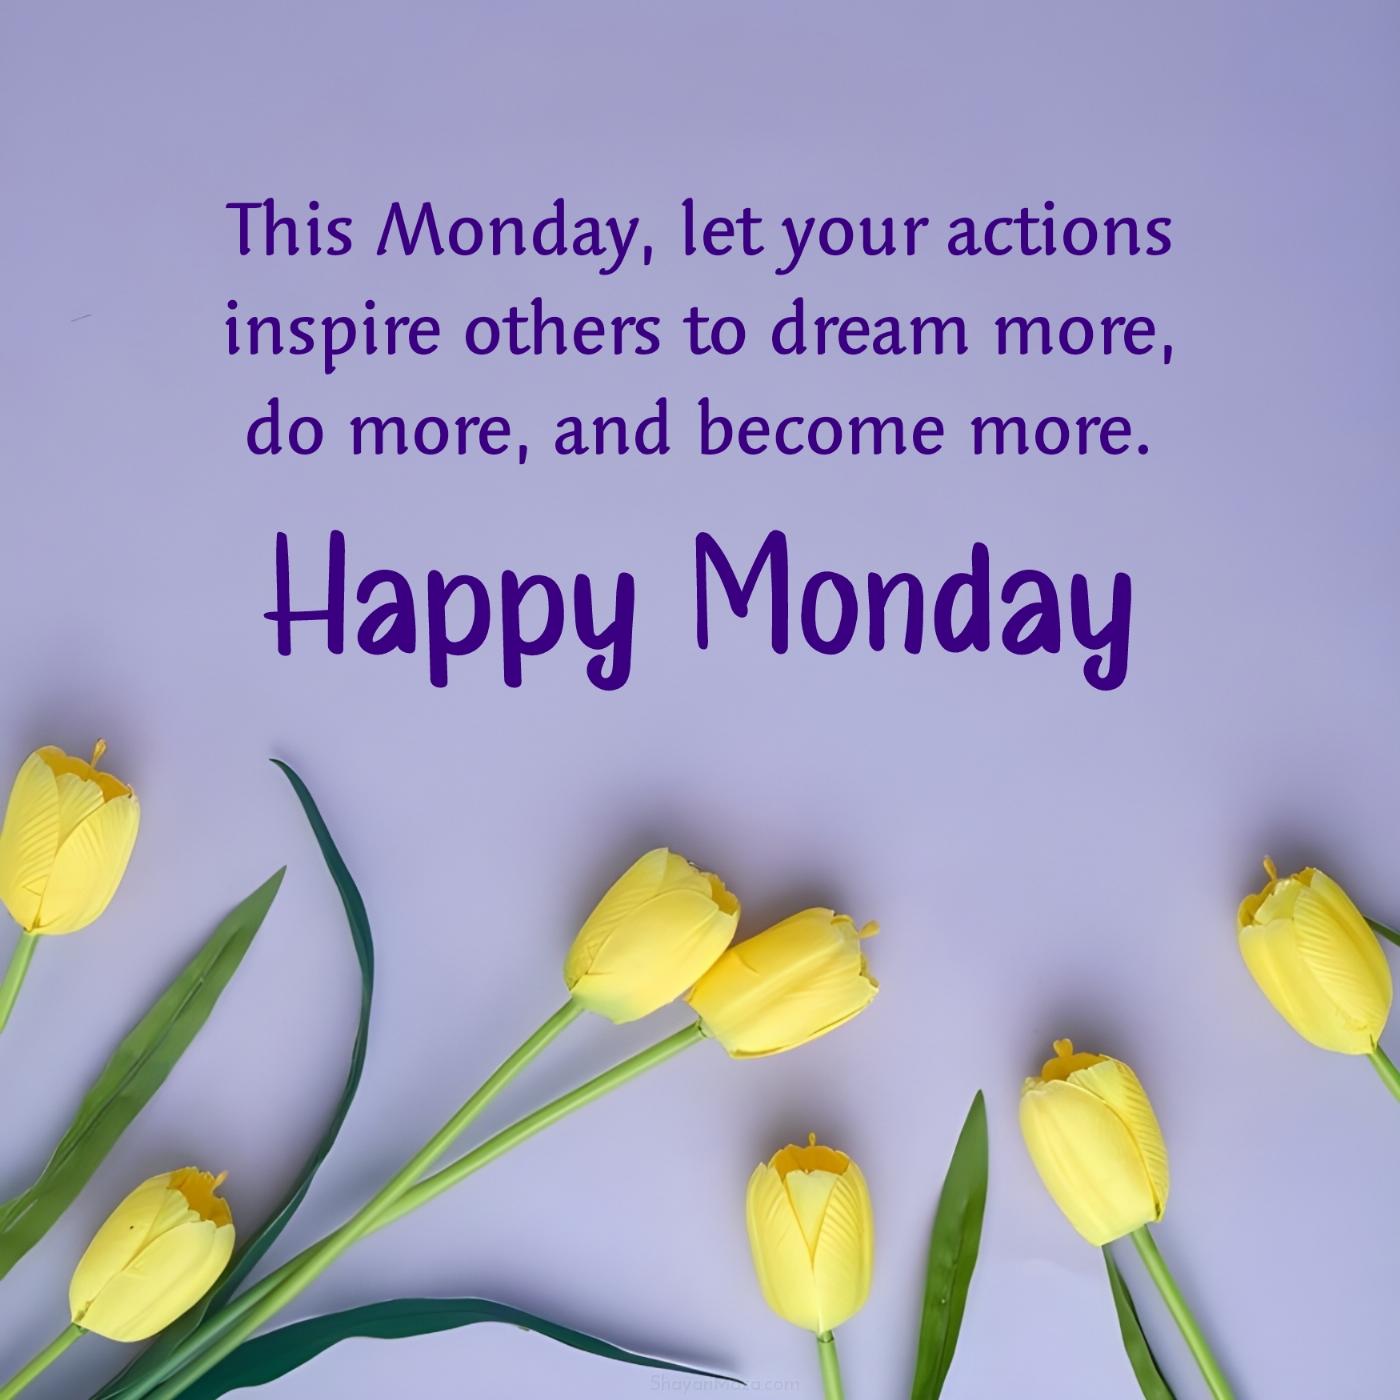 This Monday let your actions inspire others to dream more